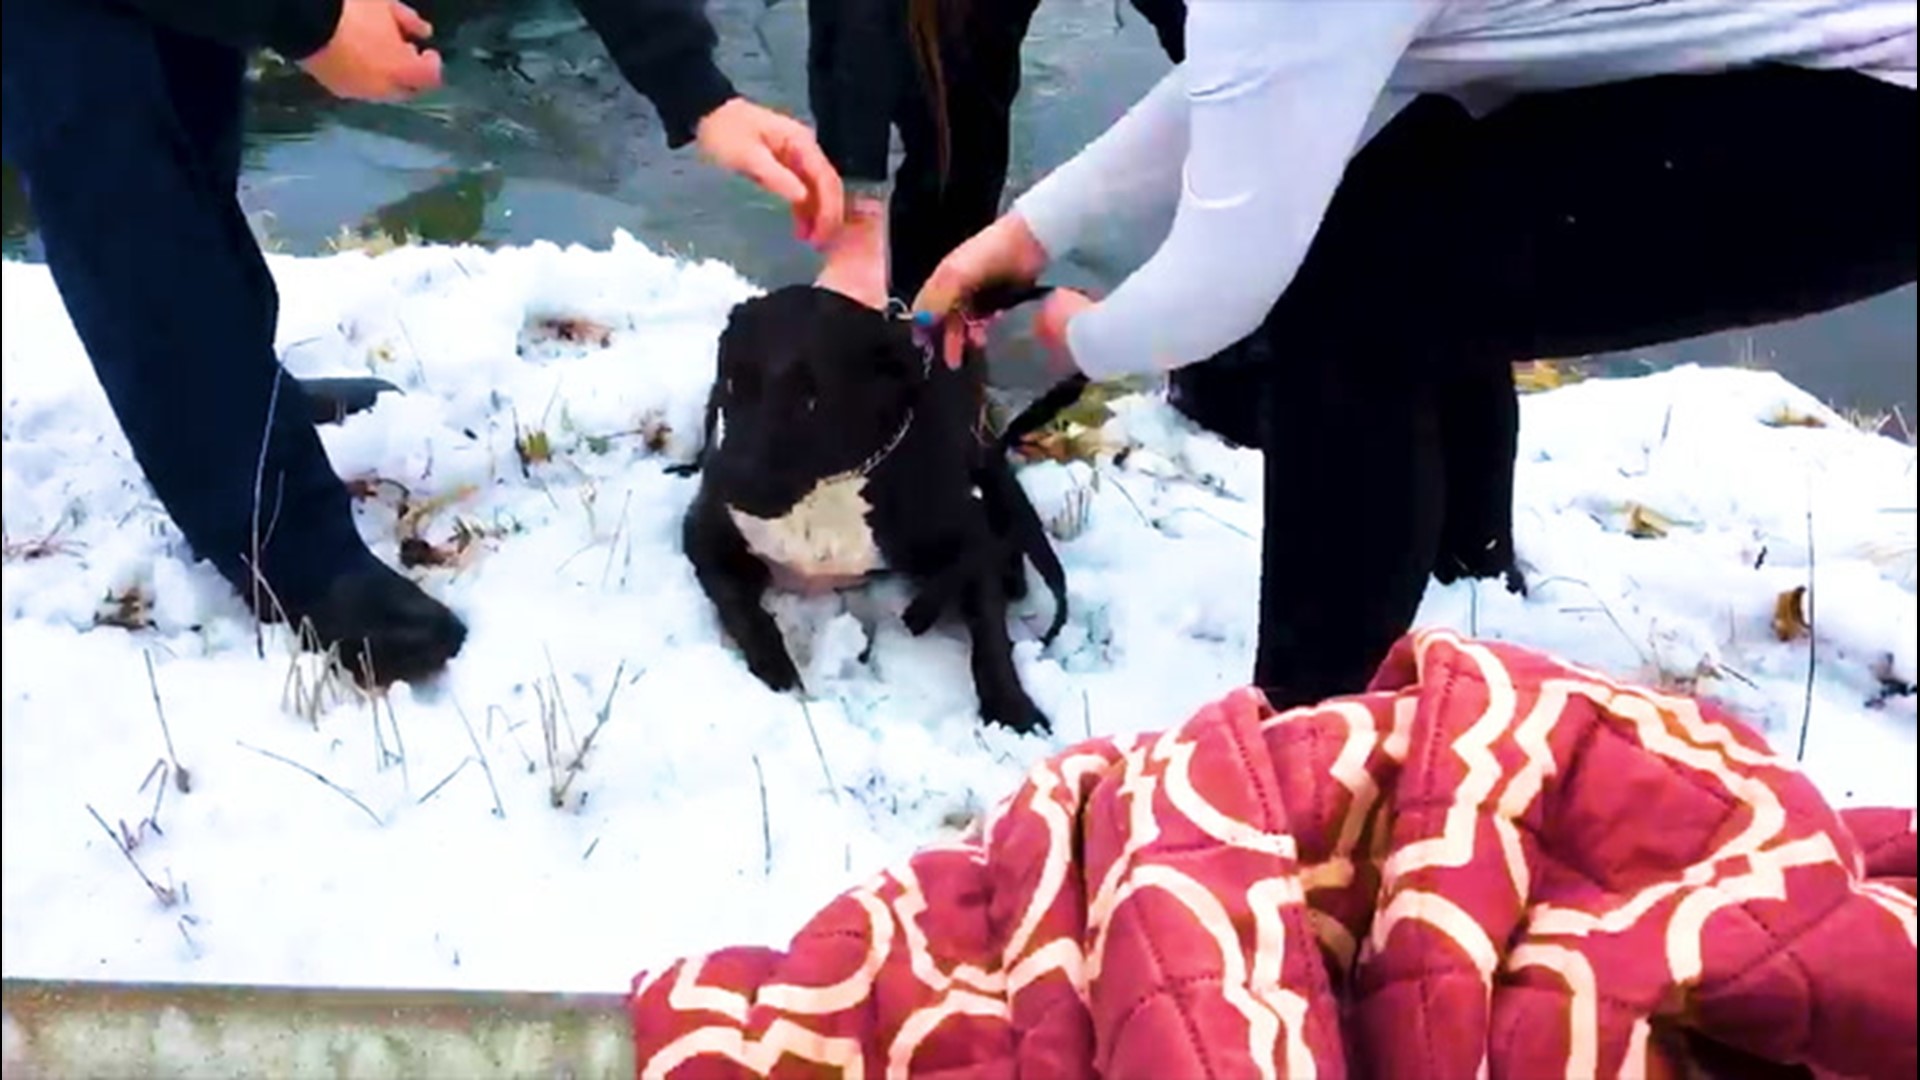 In Akron, Ohio, Officer Simms of the Springfield Township Police Department saved Lucky the dog after he fell into an icy pond on Feb. 16.